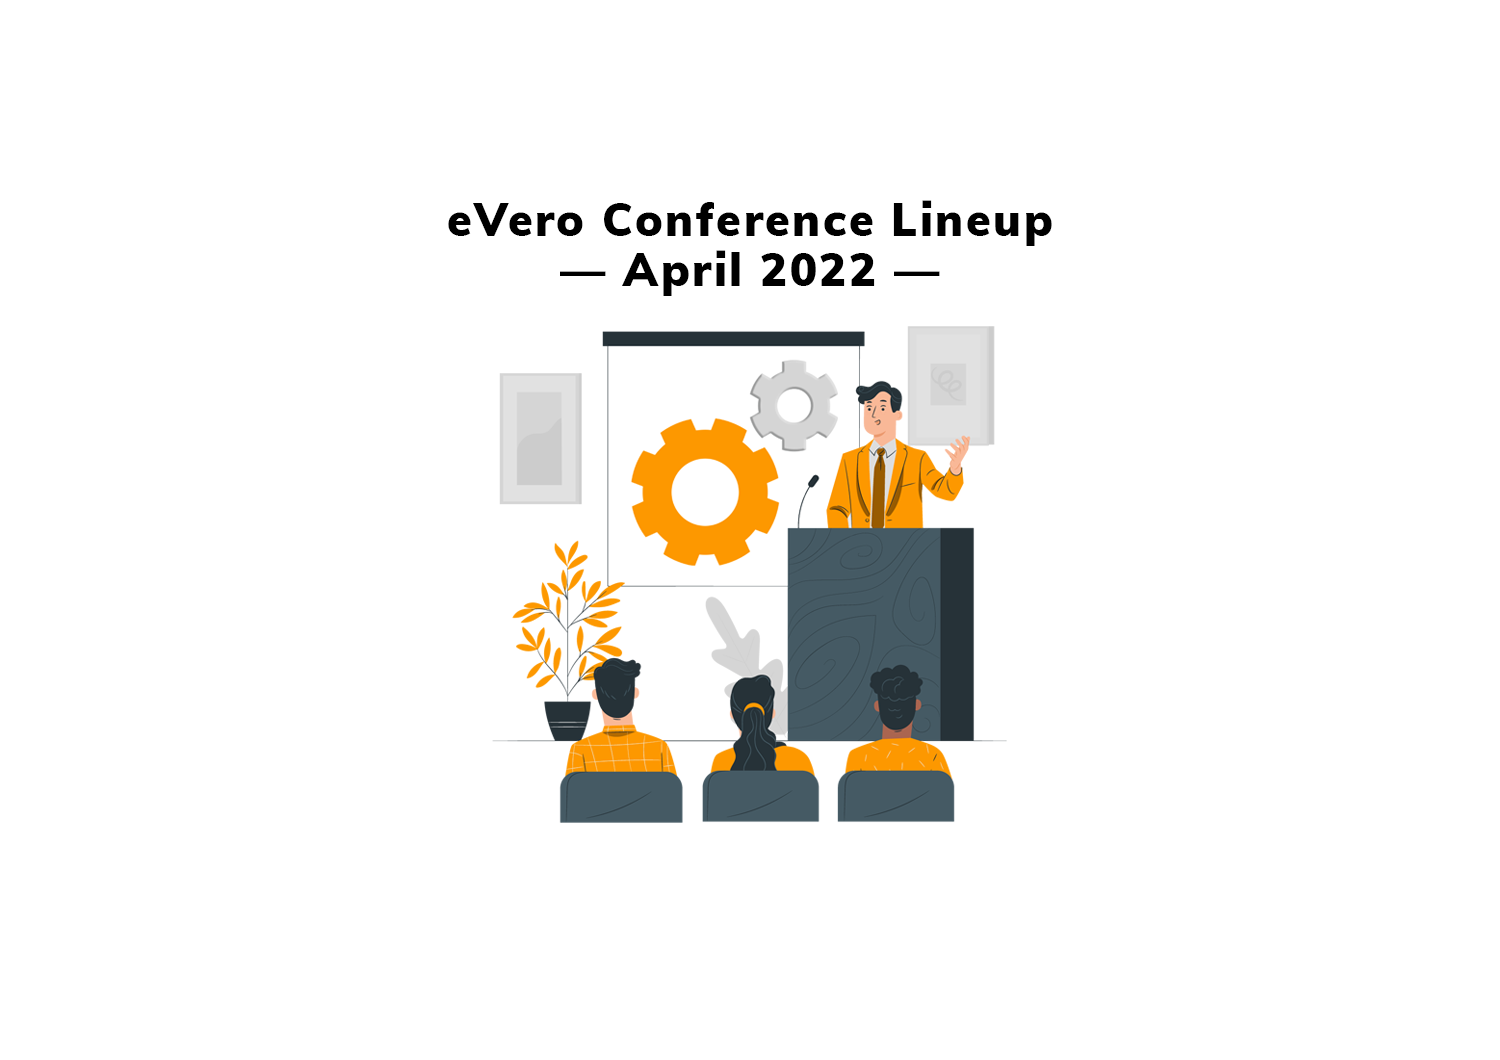 eVero's April 2022 Conference Lineup!